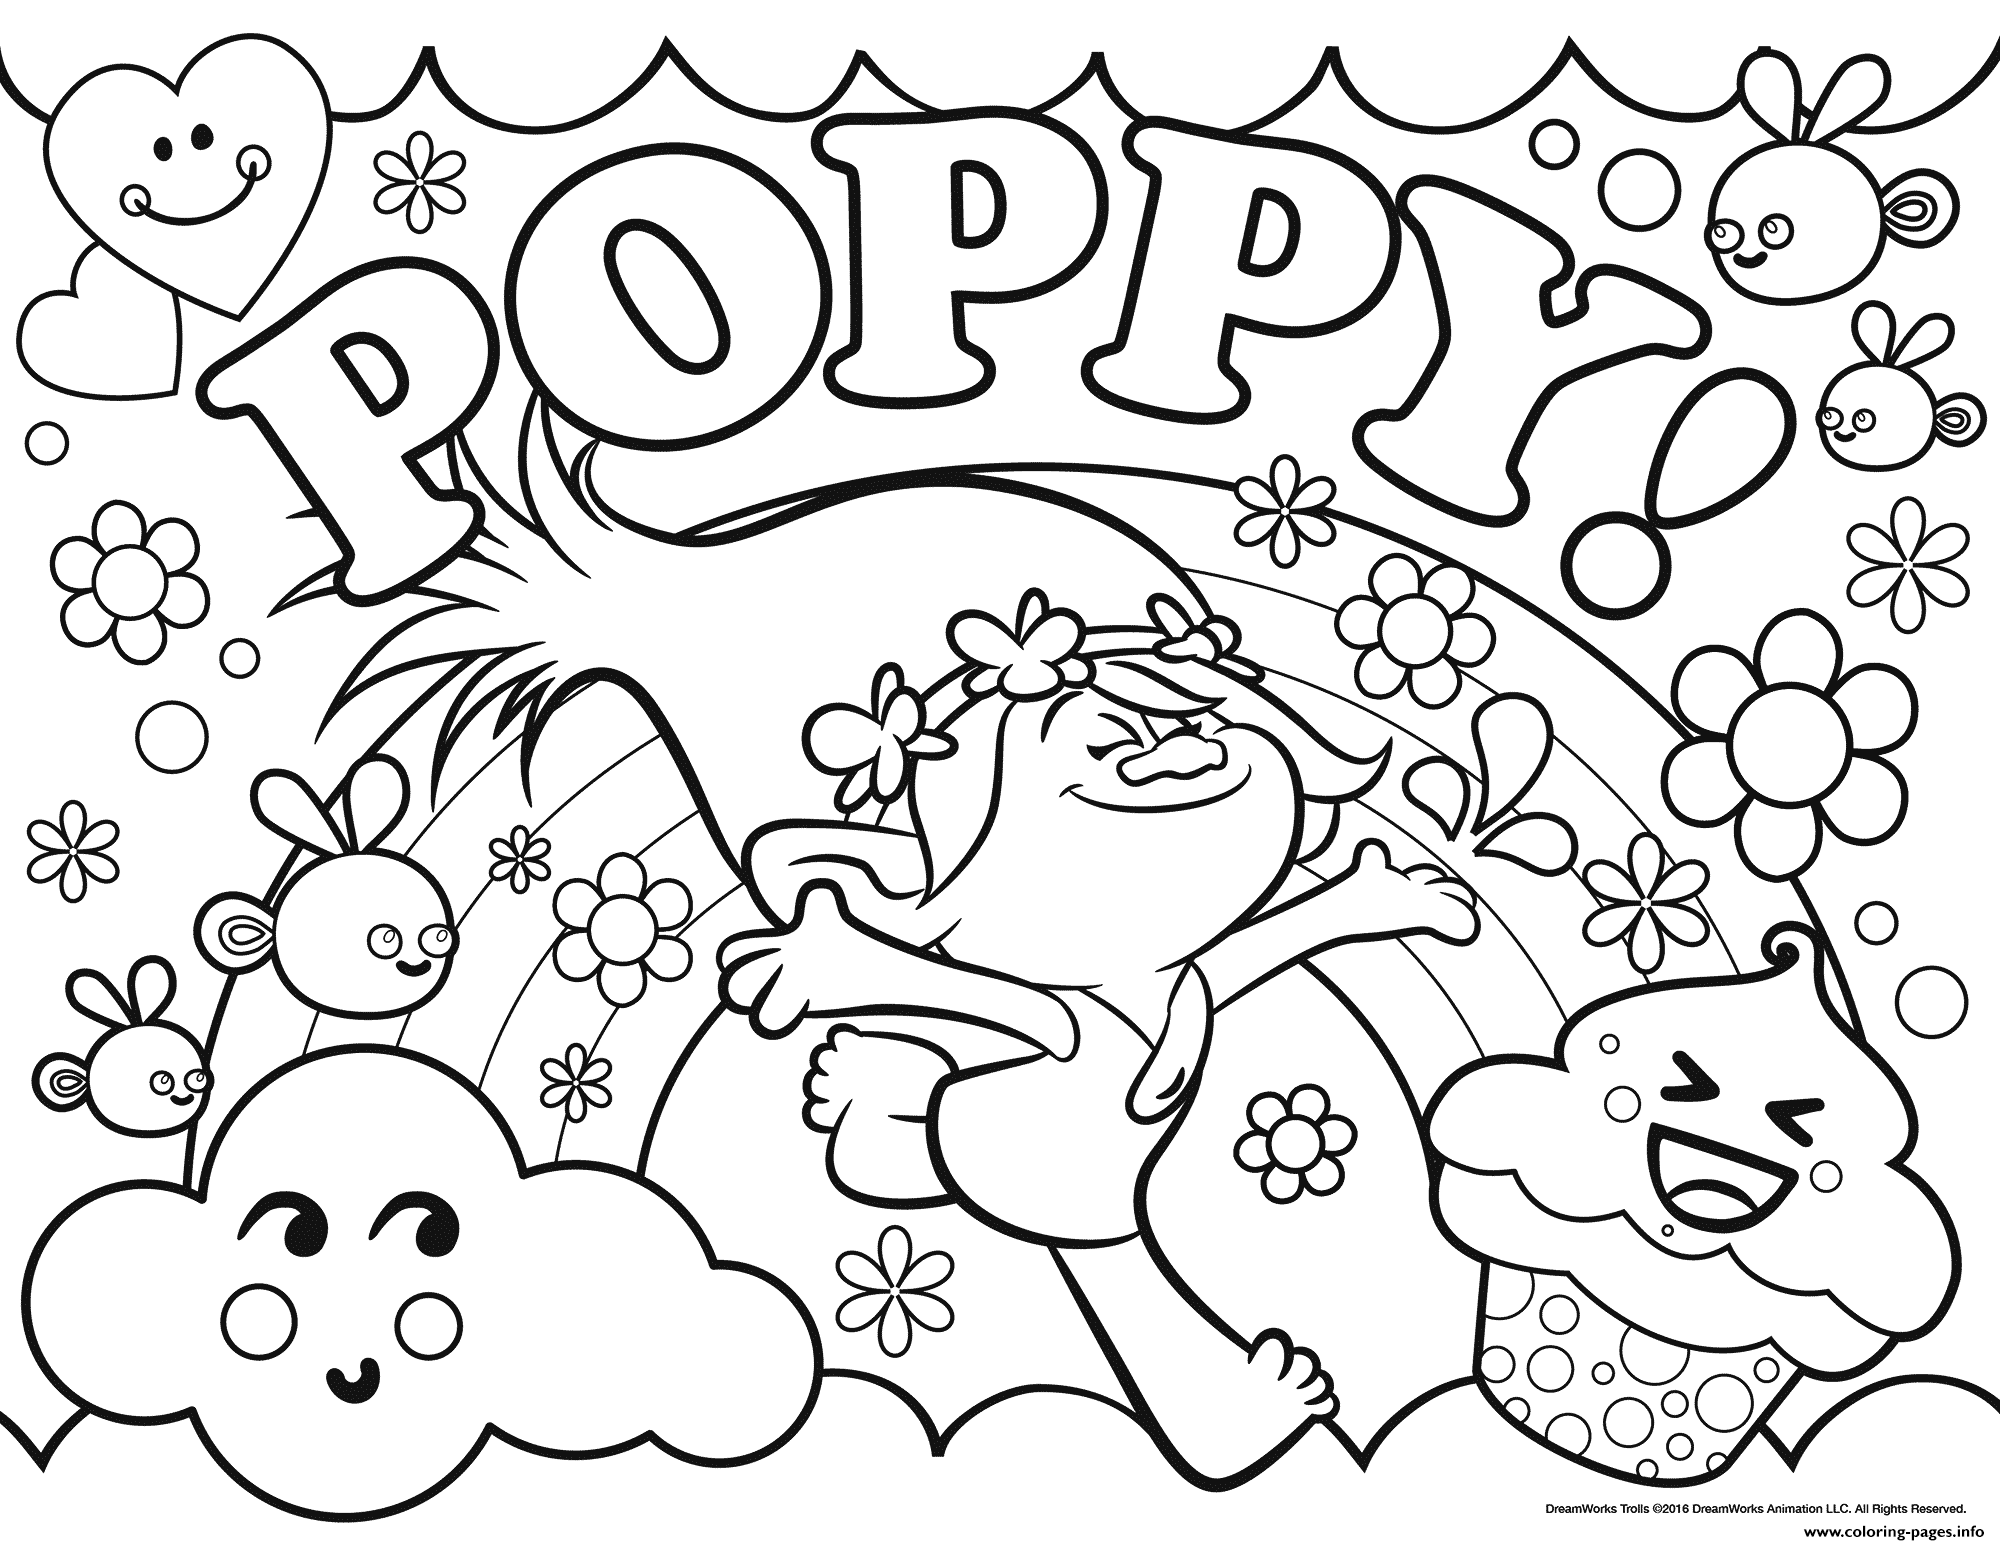 Print Trolls Poppy Coloring Pages Poppy Coloring Page Cartoon Coloring Pages Coloring